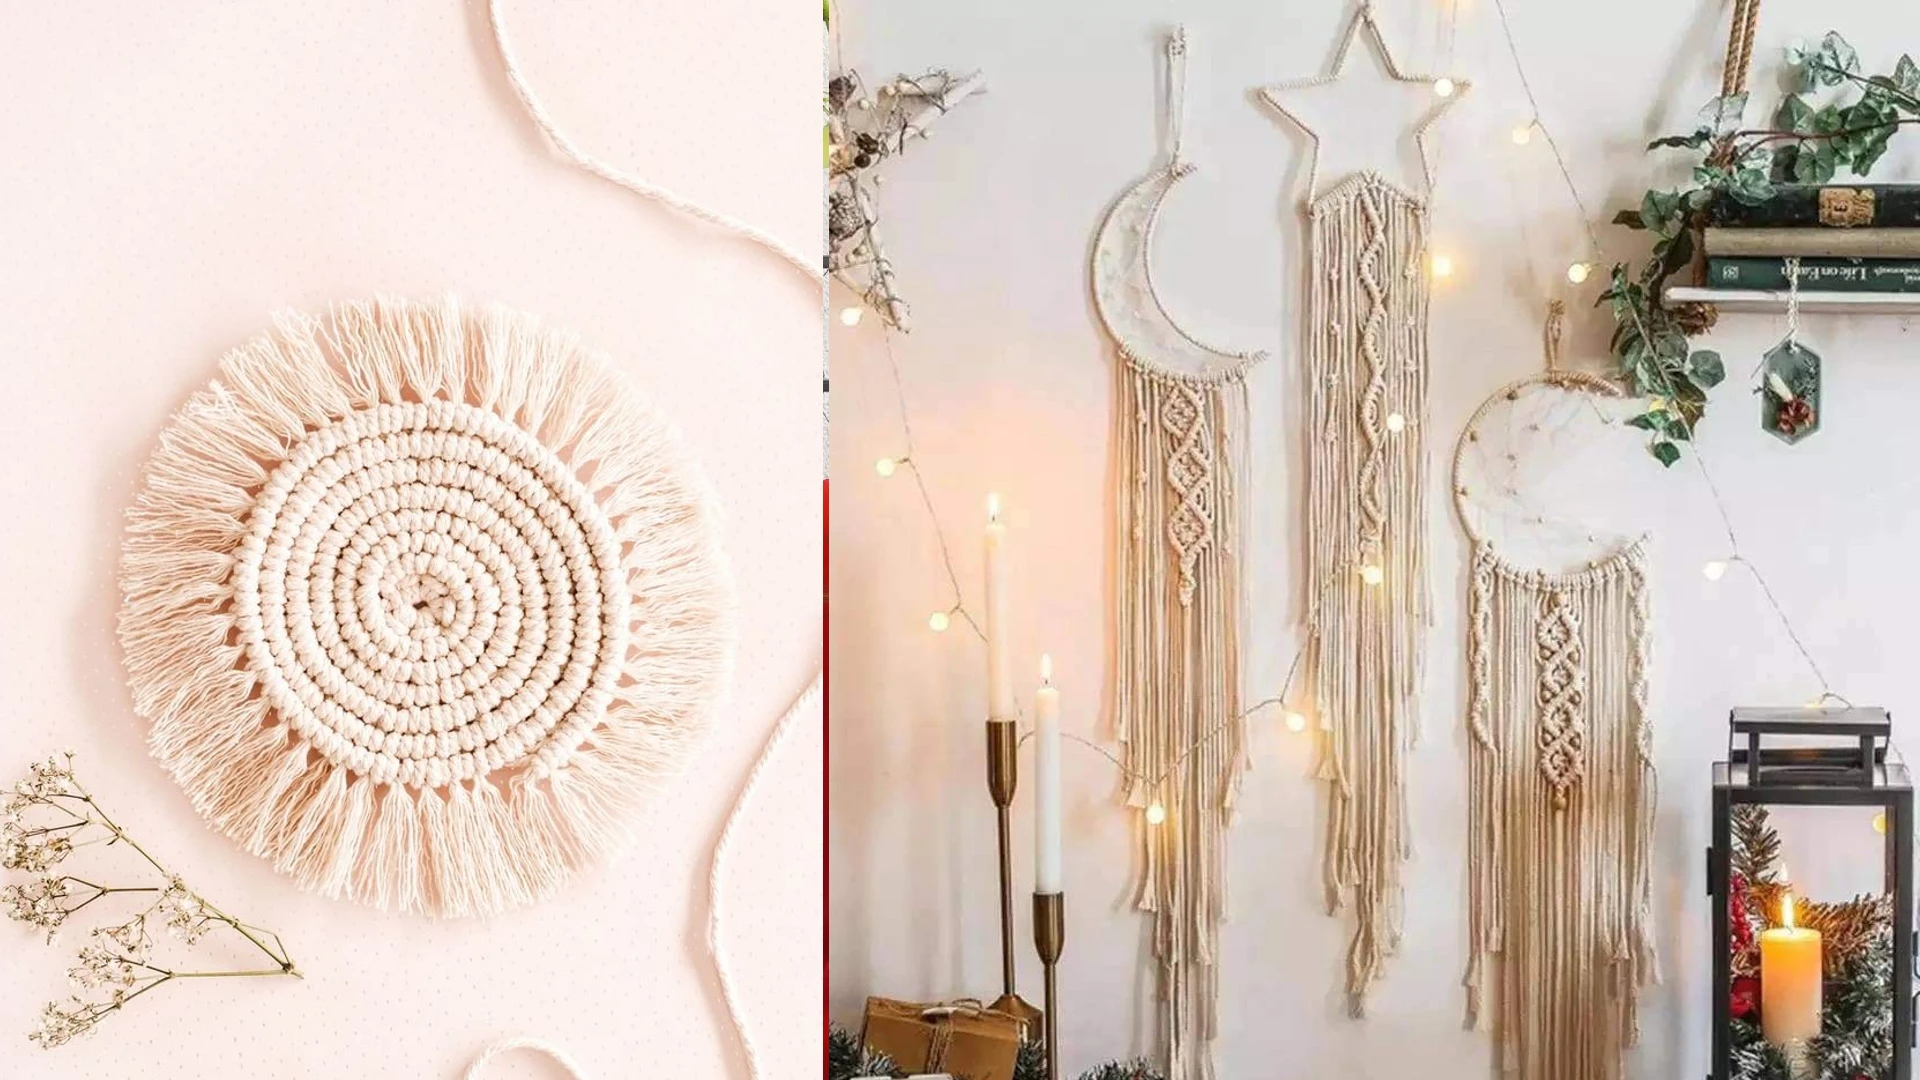 From Macrame Lampshades to Shelves & More, this website offers it all!